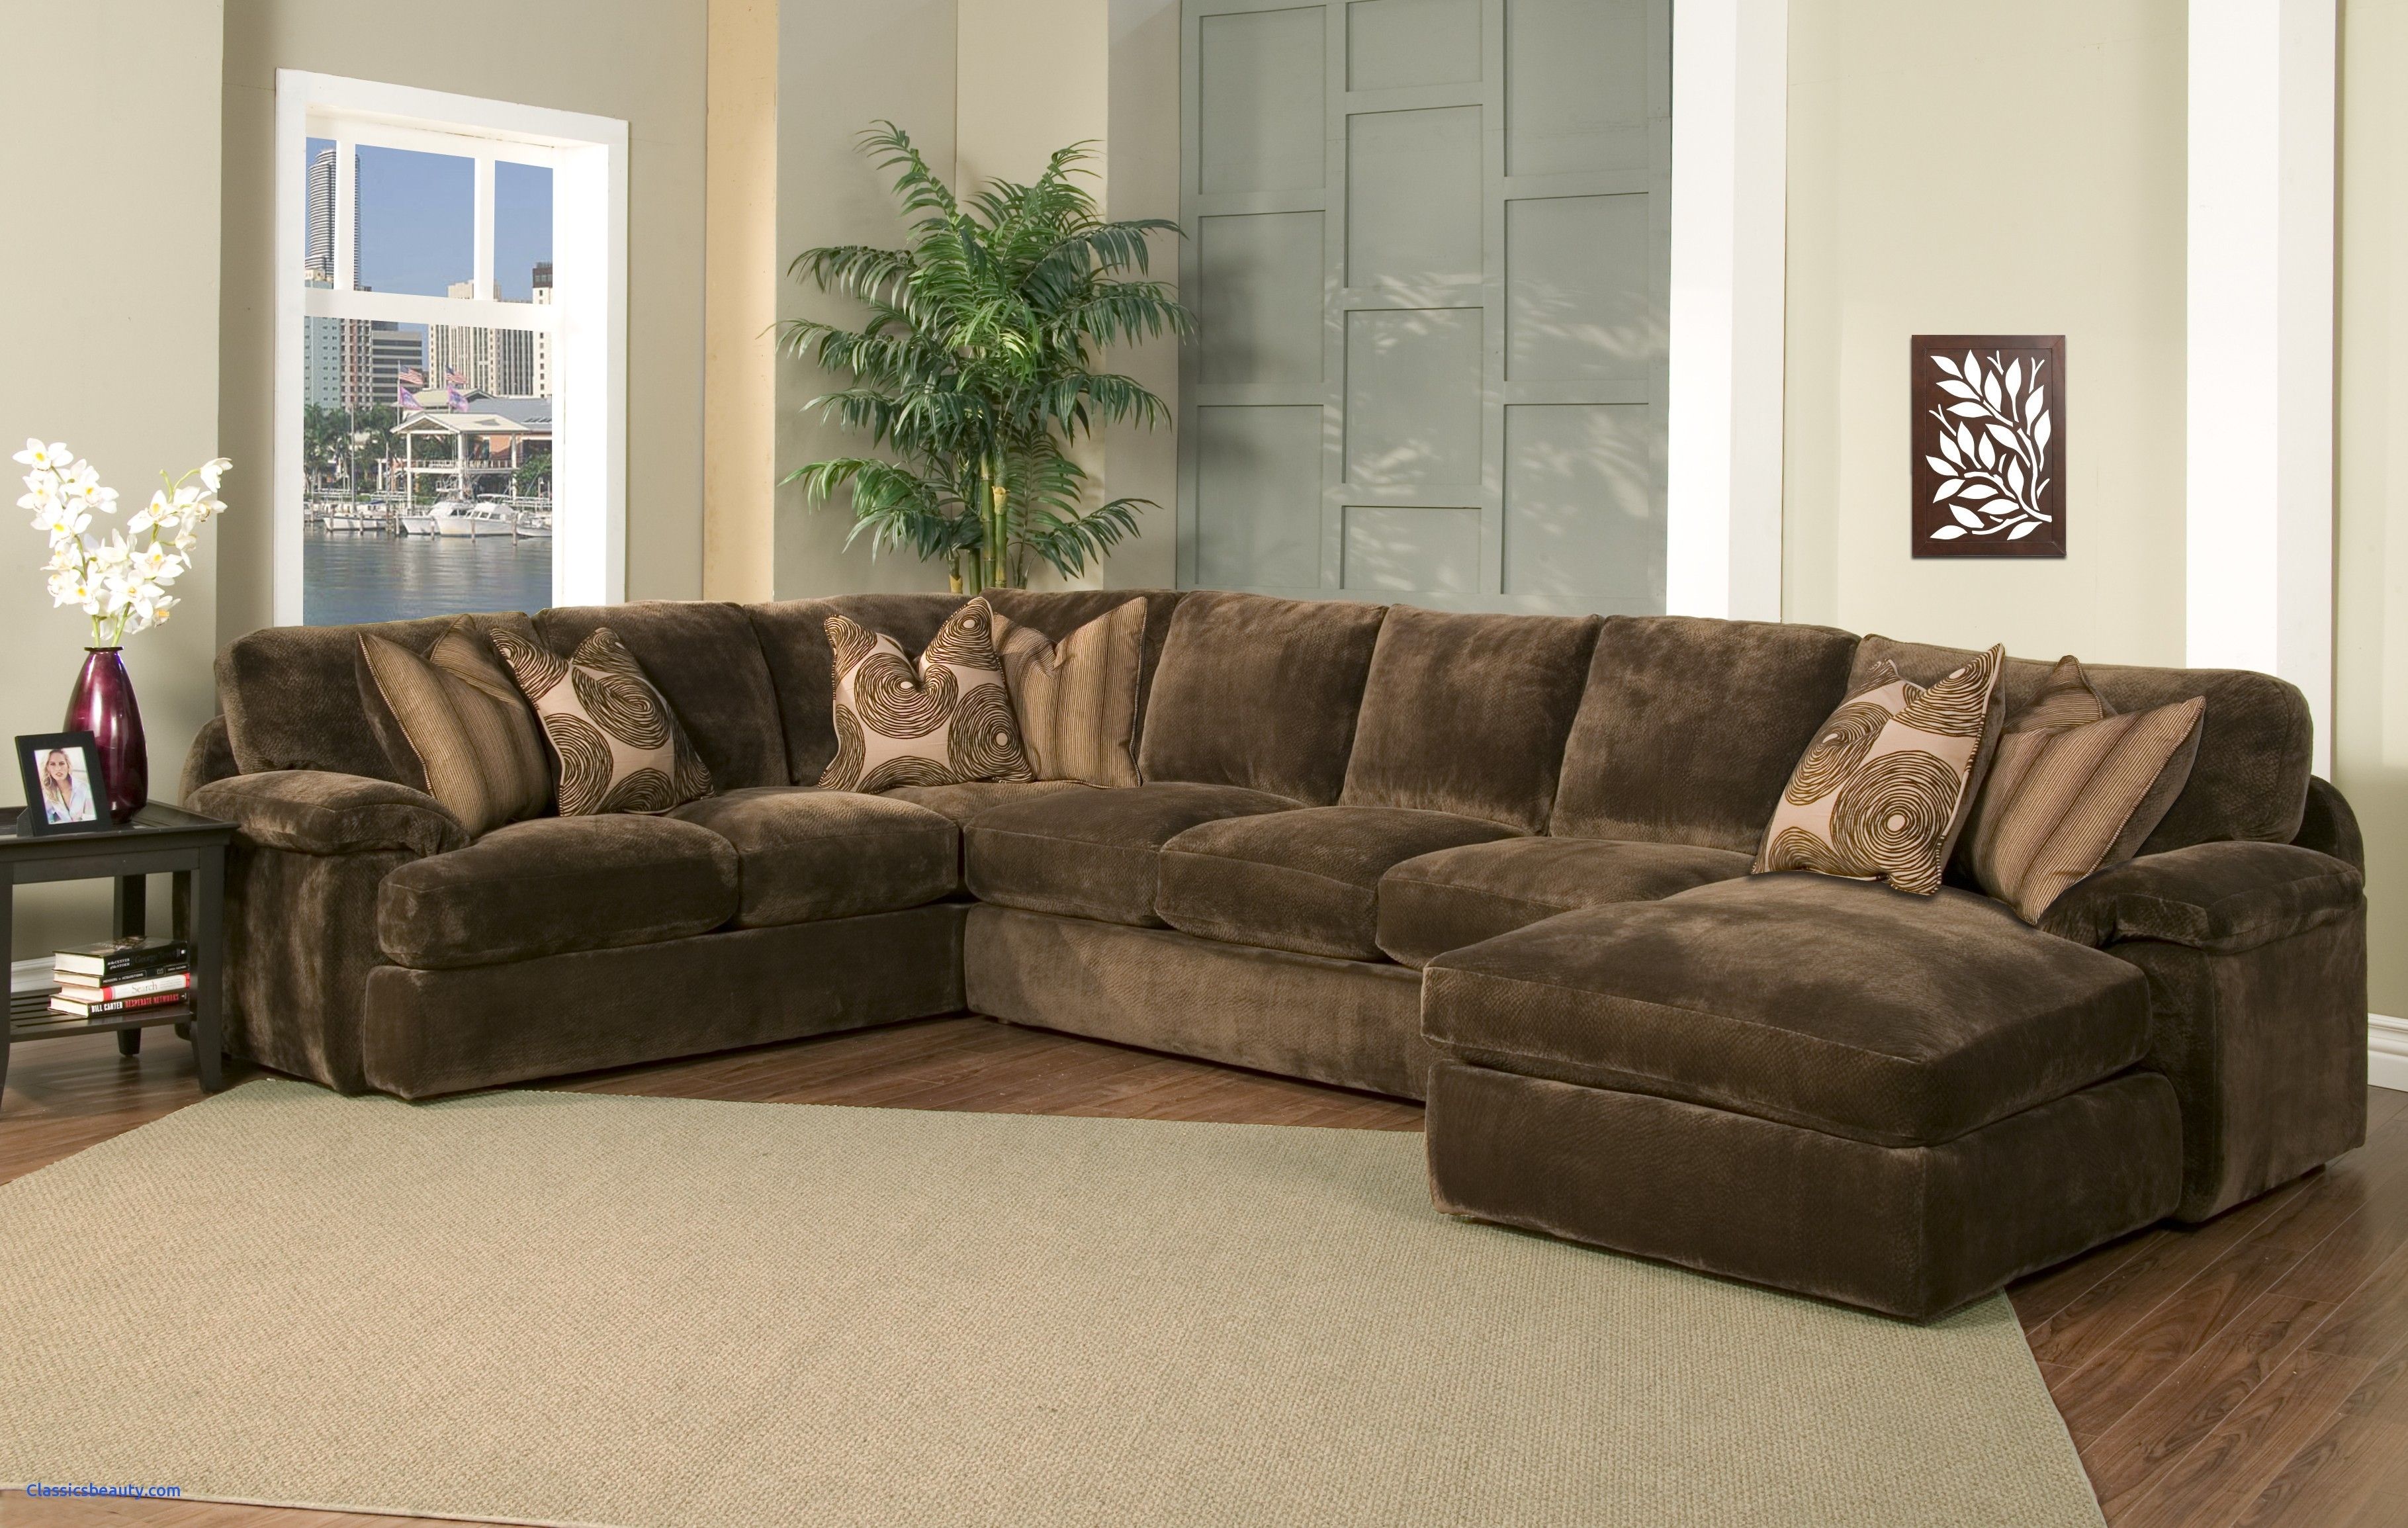 Sofa : Sectionala Sale Spring Hill Florida Amazon Salesectional Pertaining To Michigan Sectional Sofas (View 4 of 10)